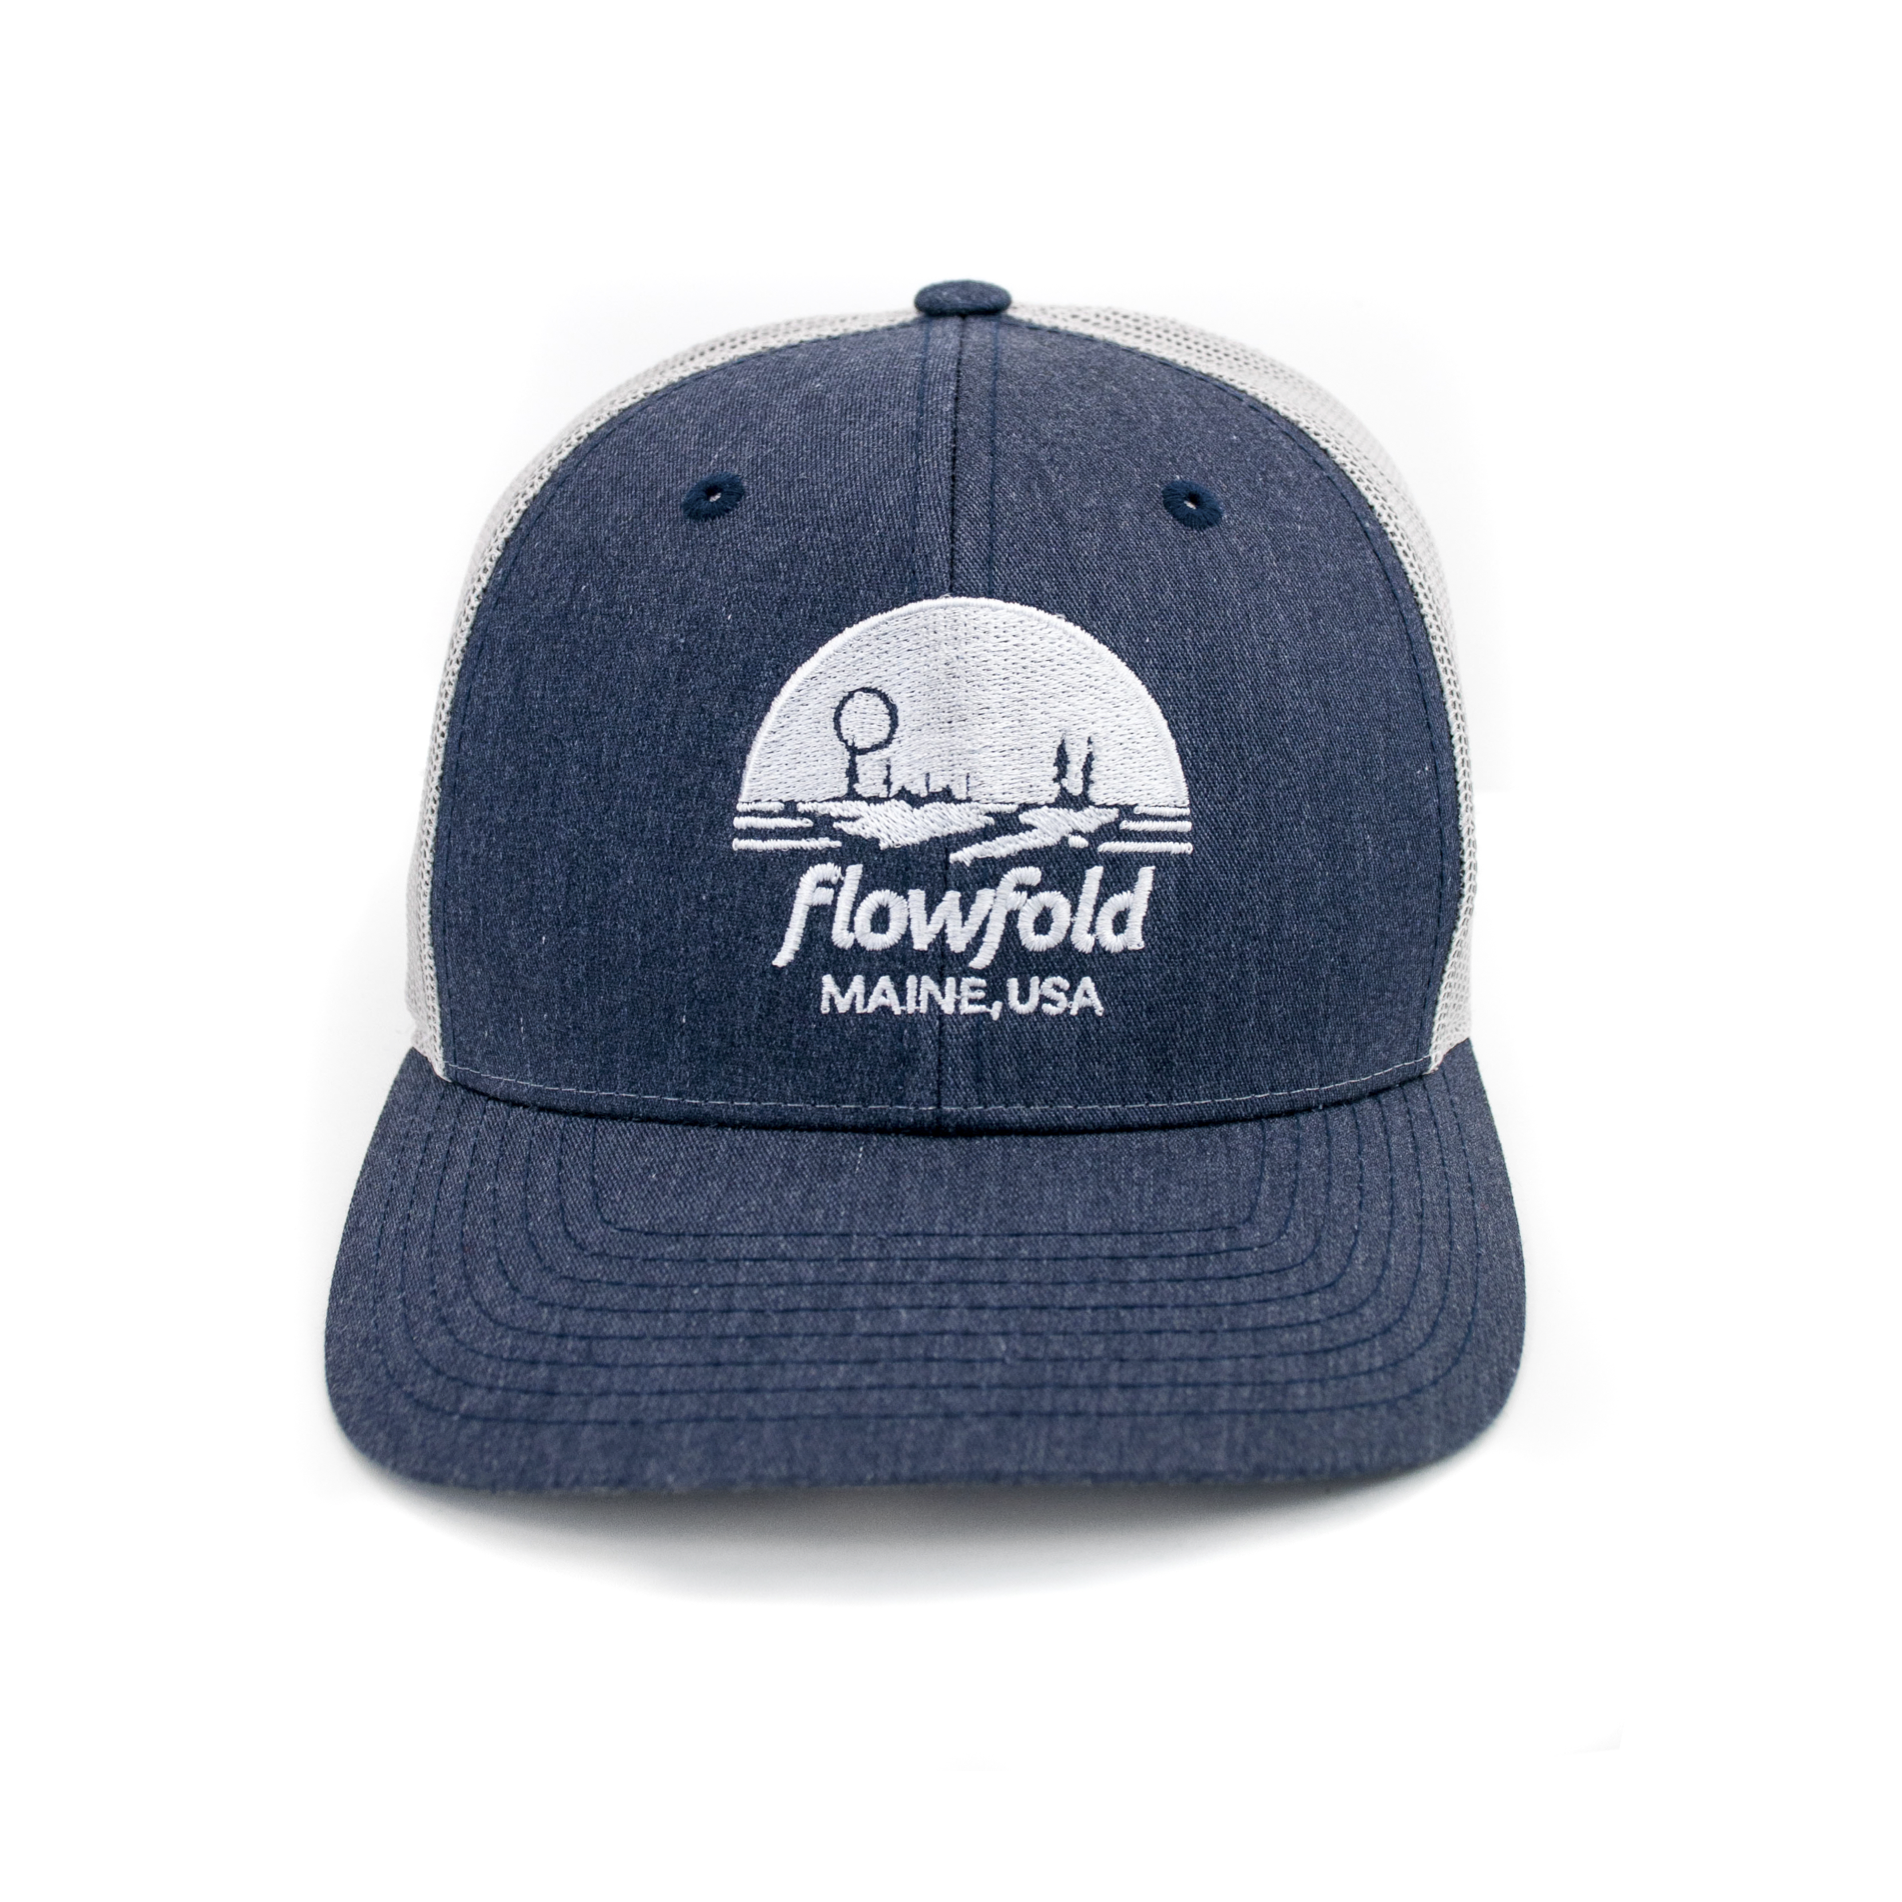 White Low Profile Trucker hat front view logo 